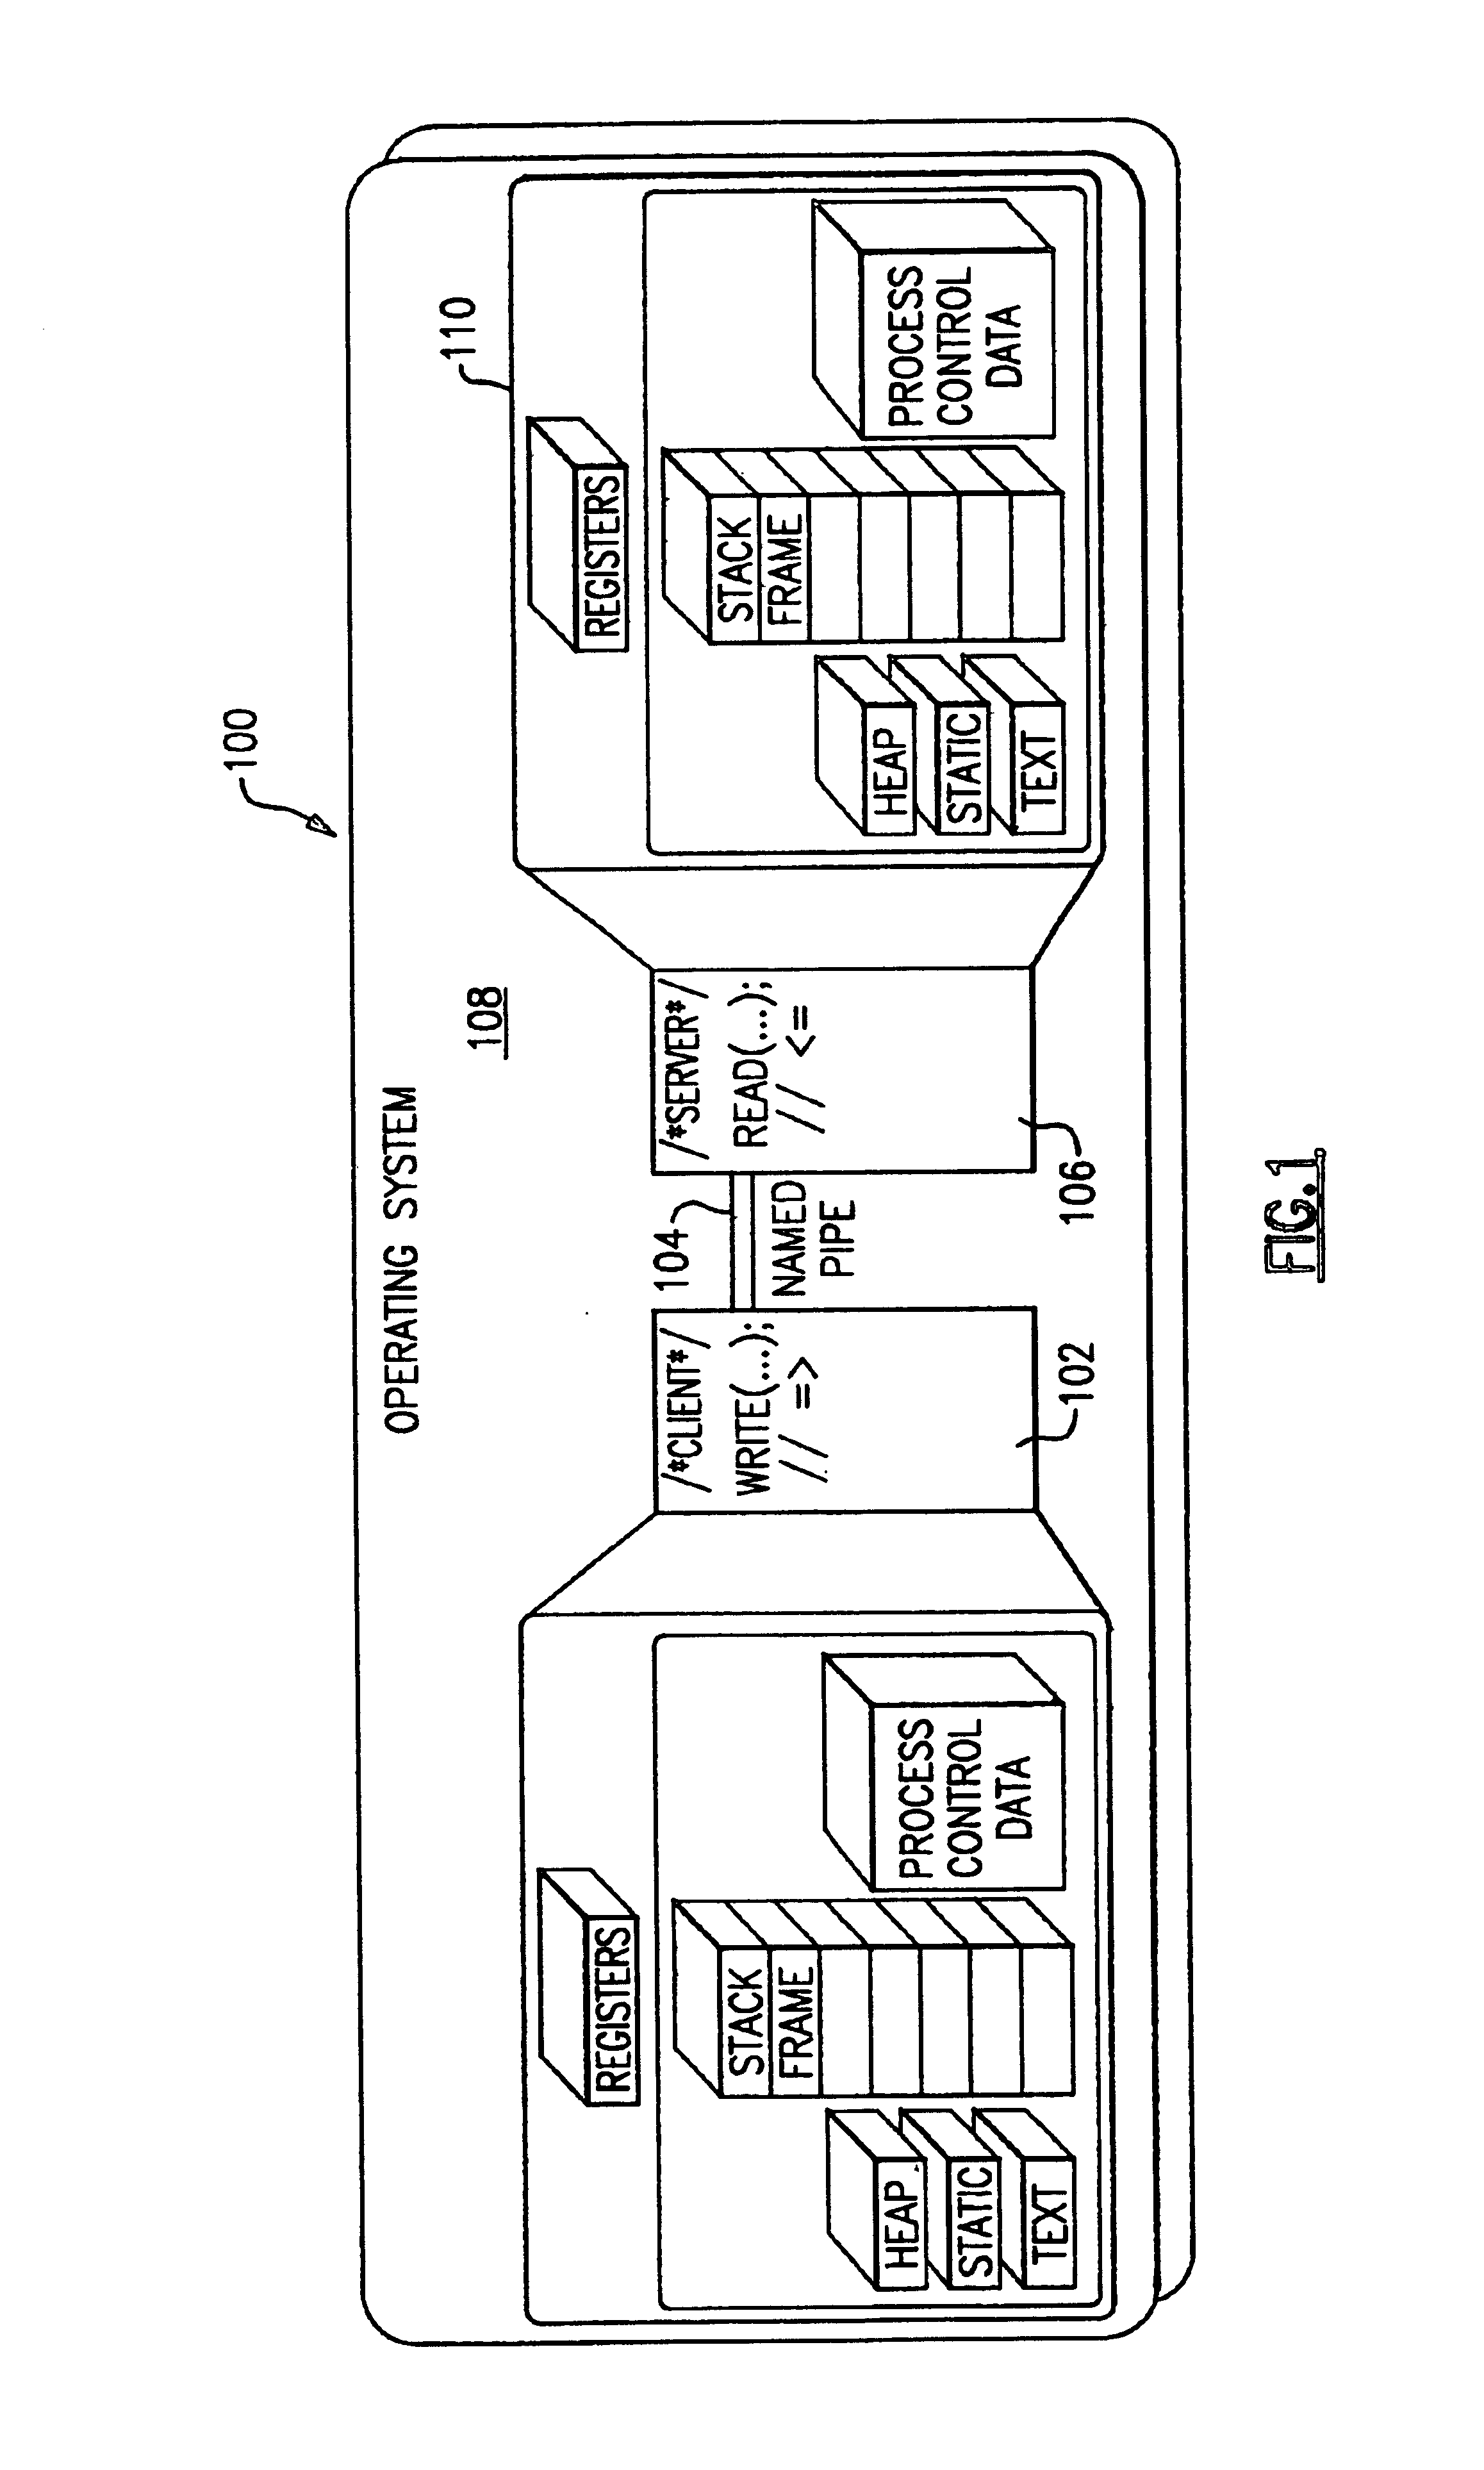 Method, apparatus and program storage device for enabling the reading of data from a named pipe while minimizing the use of system resources